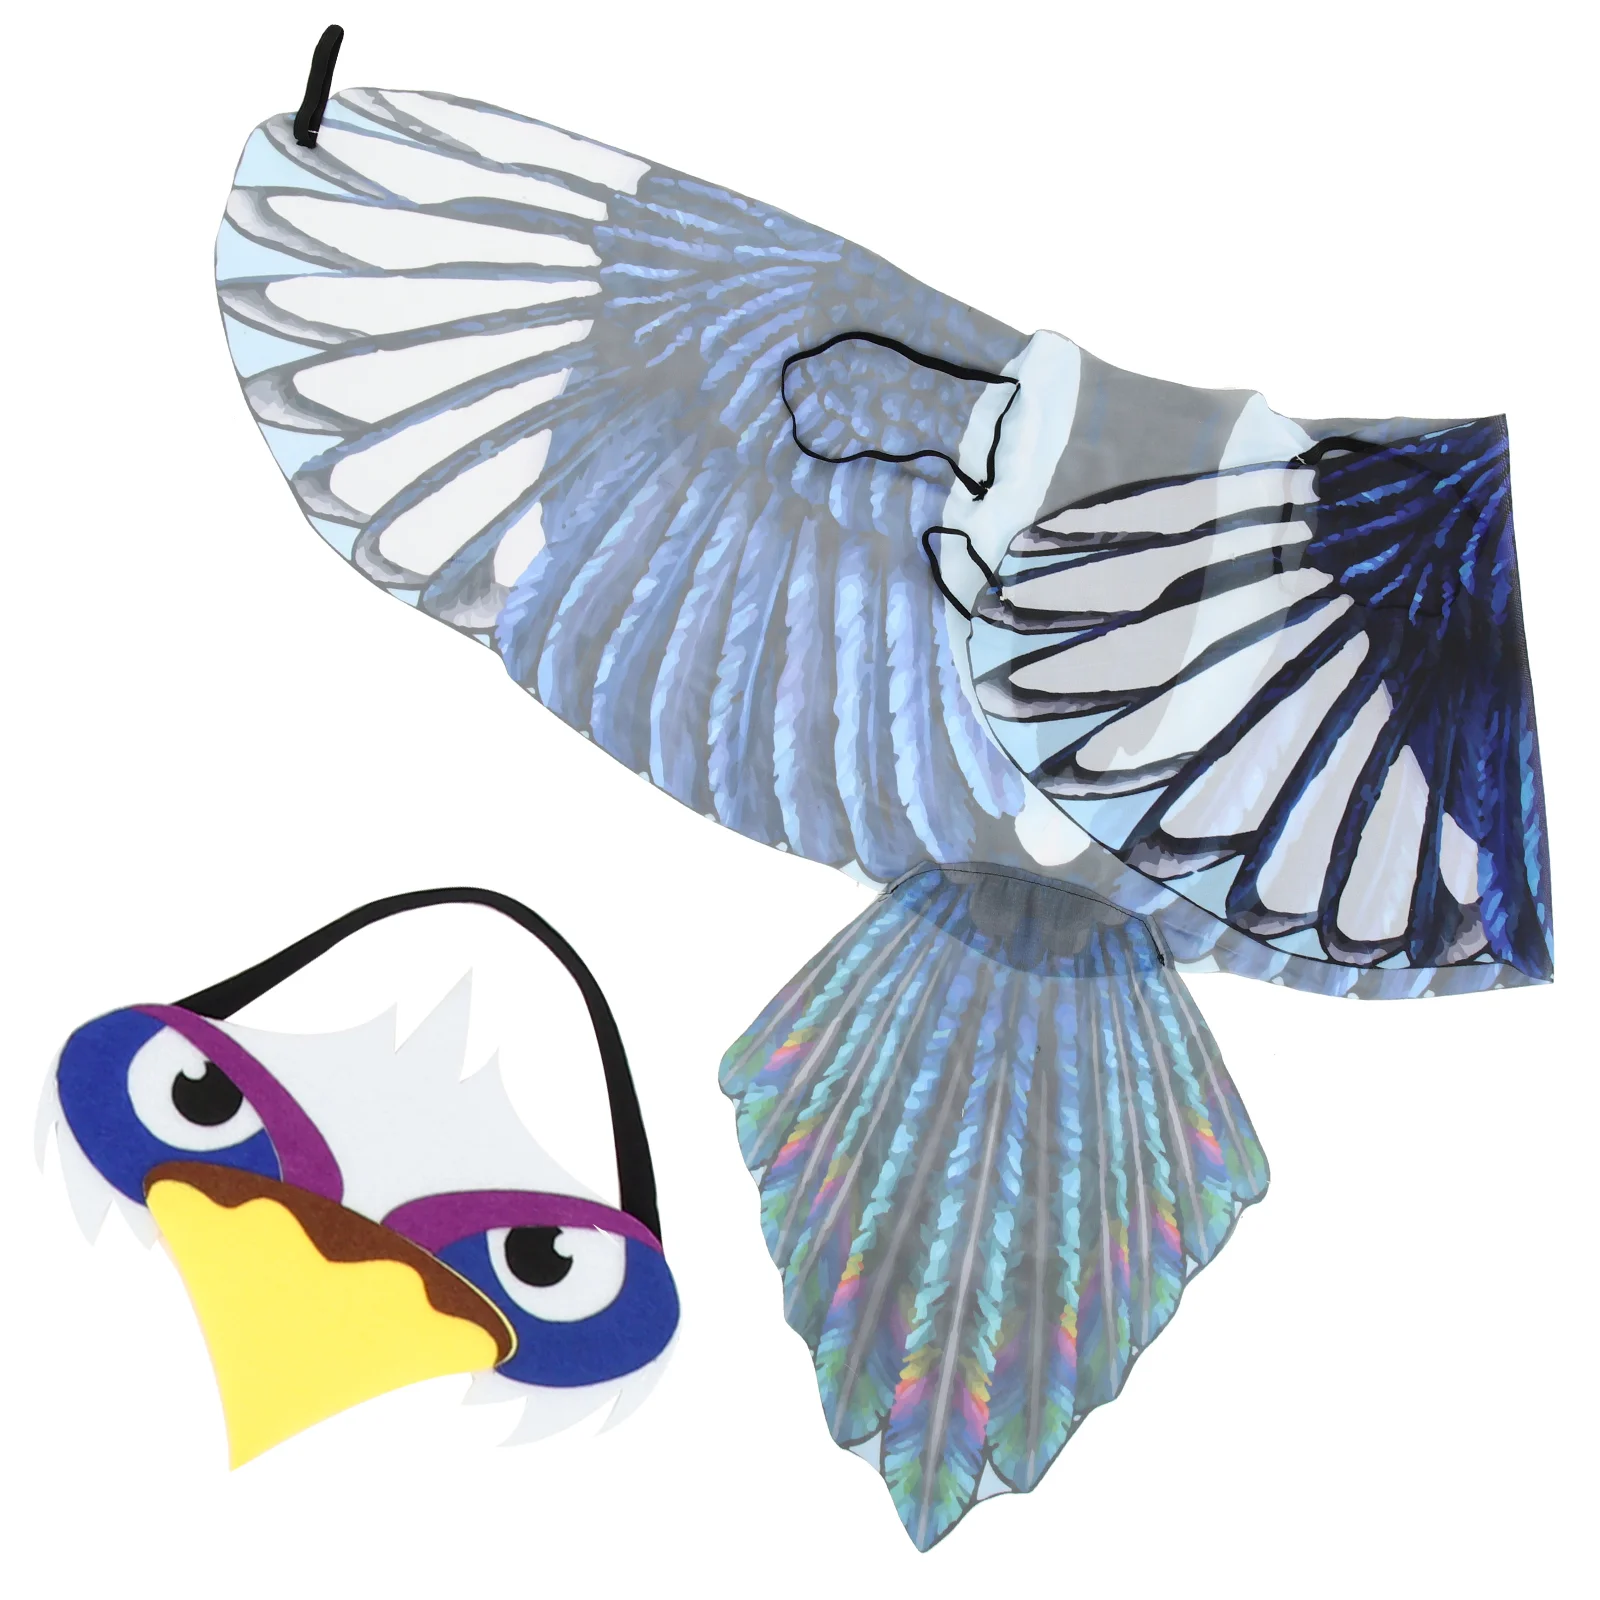 

Eagle Wings Creative Costume Adornment Boy Cosplay Halloween Decor Aldult Prop Performance Party Favor Chiffon Child